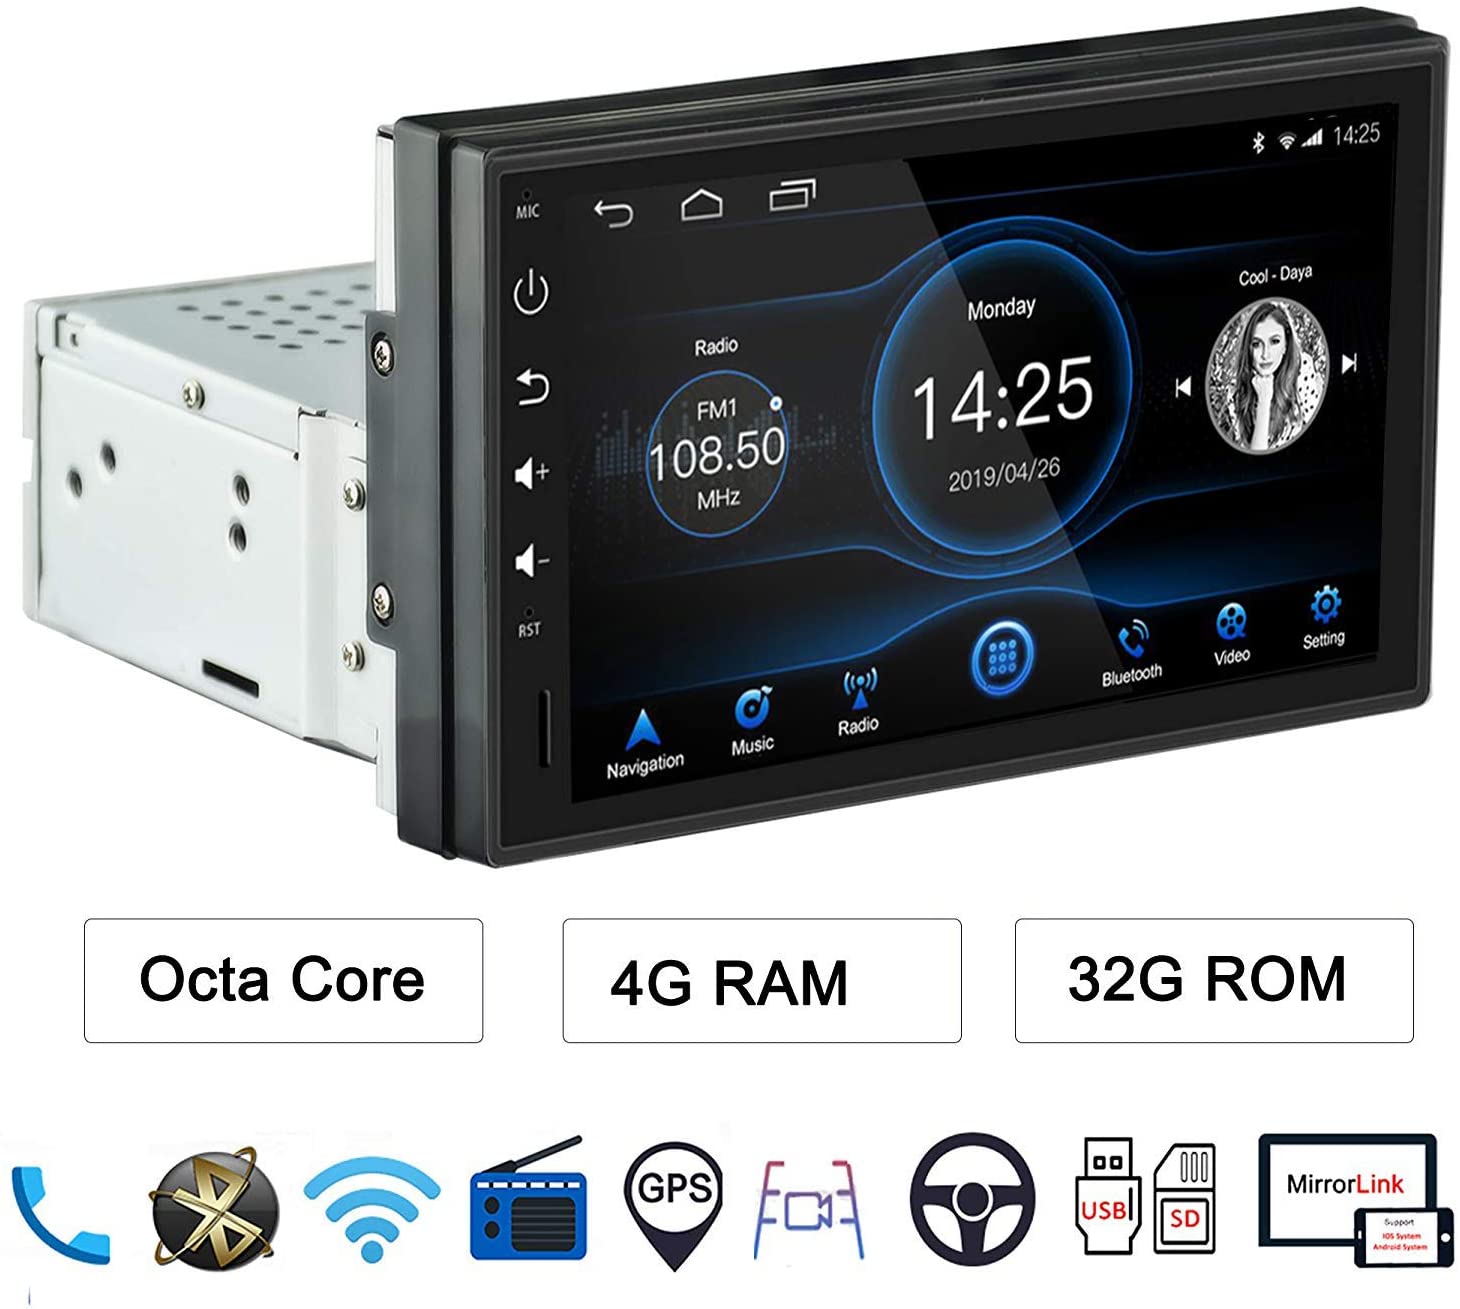 LEXXSON 1 Din Android Car Stereo Android 8.1 Octa Core 4GB RAM Head Unit  with Nav Bluetooth WIFI Support DAB+ RDS GPS USB SD Mirror Link, with 7  inch 